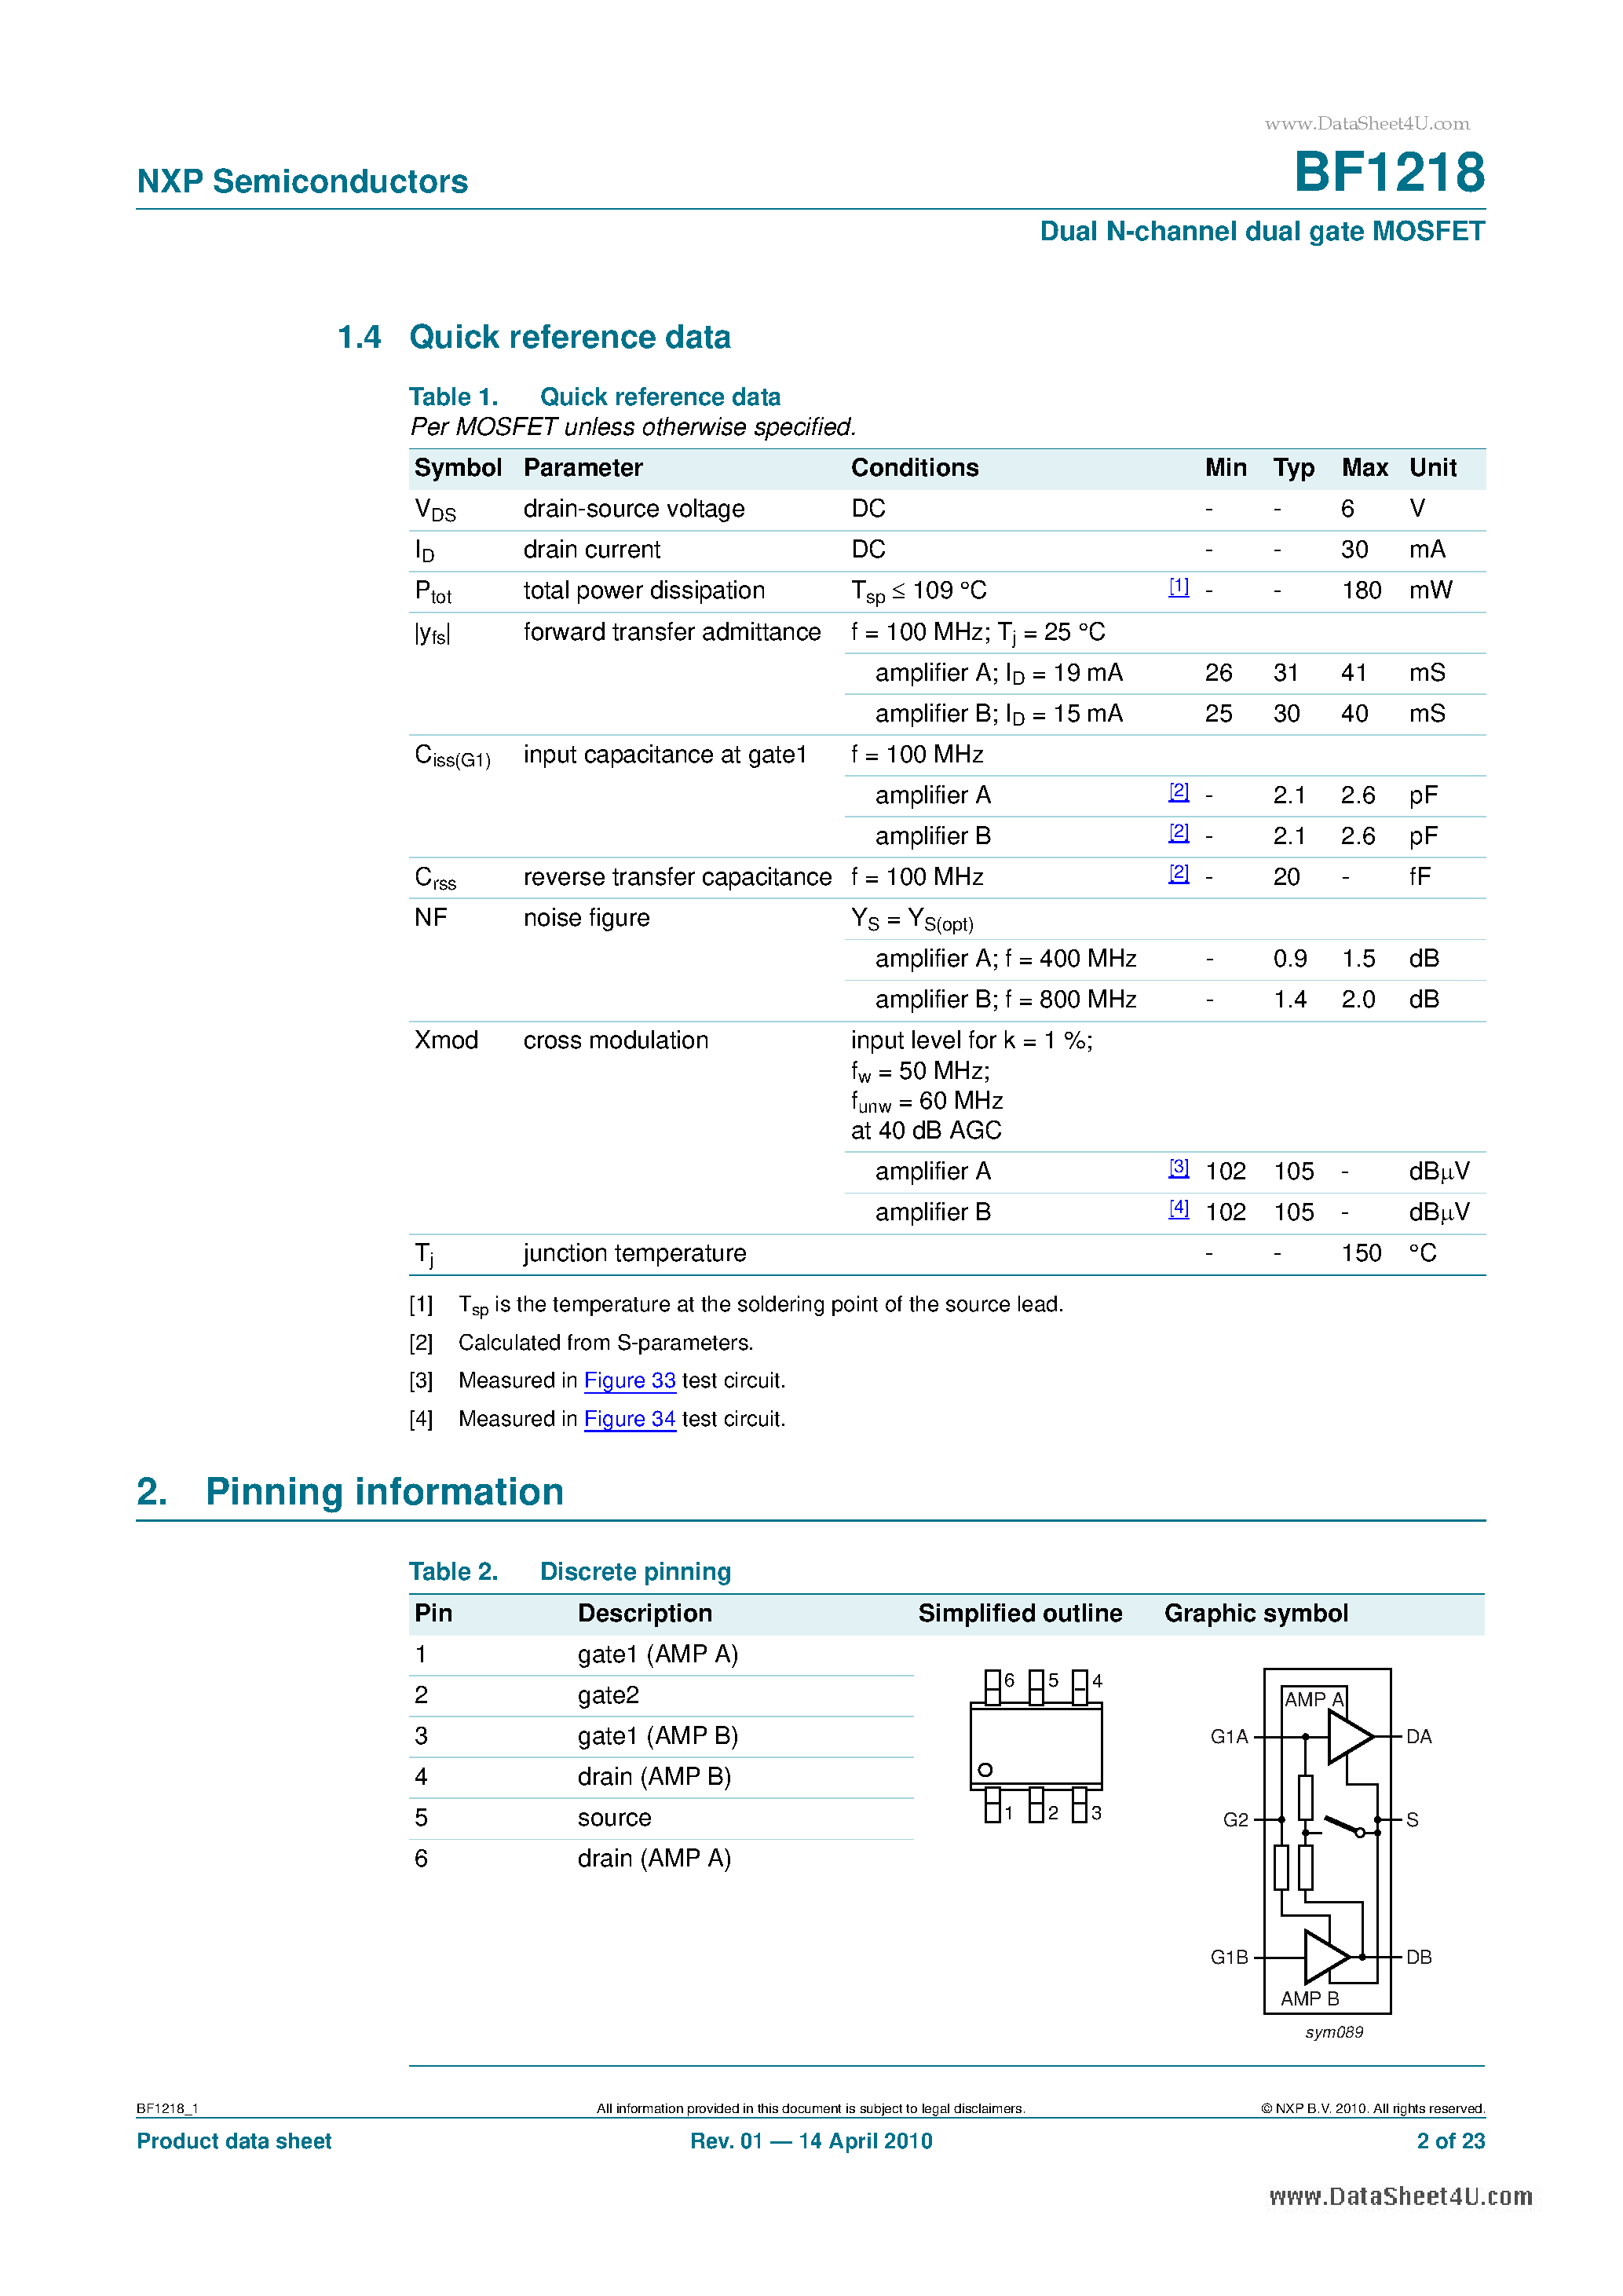 Datasheet BF1218 - Dual N-channel dual gate MOSFET page 2